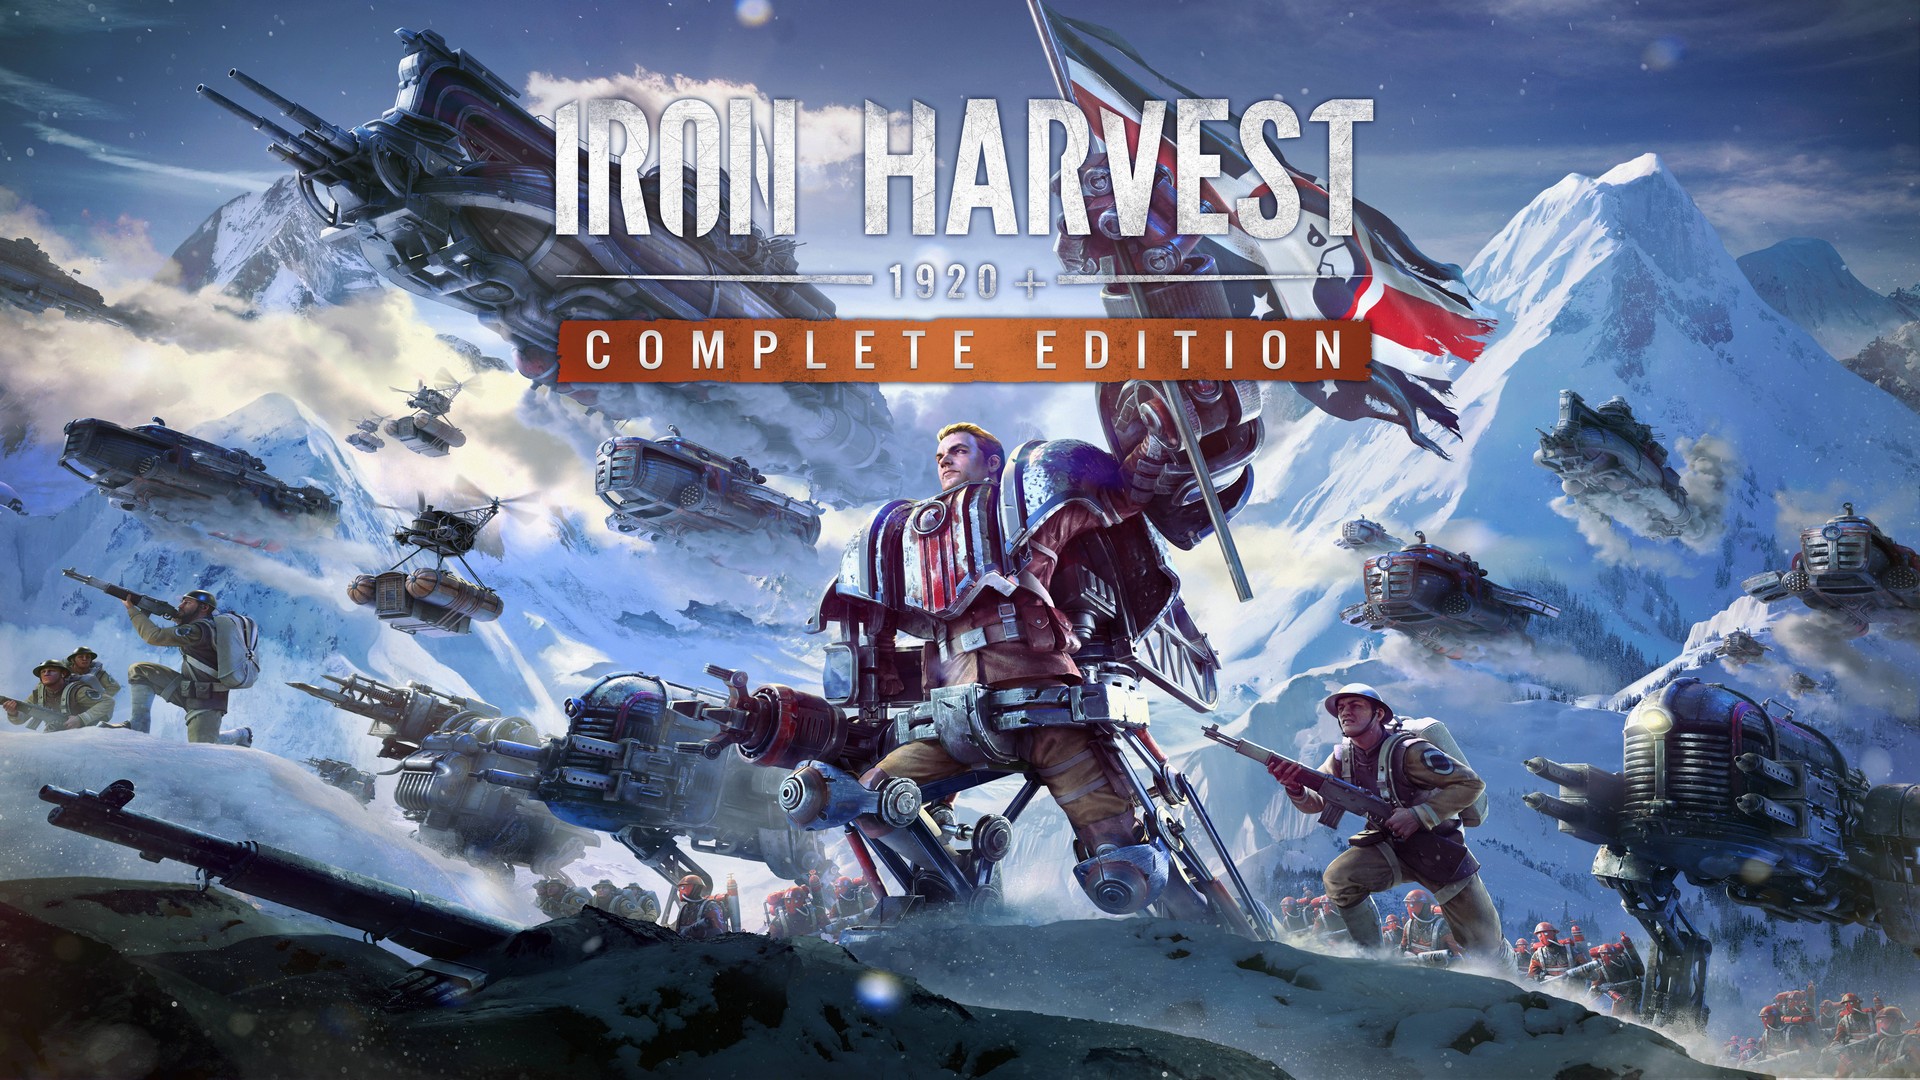 Iron Harvest Complete Edition Releasing On PlayStation 5 & Xbox Series S|X